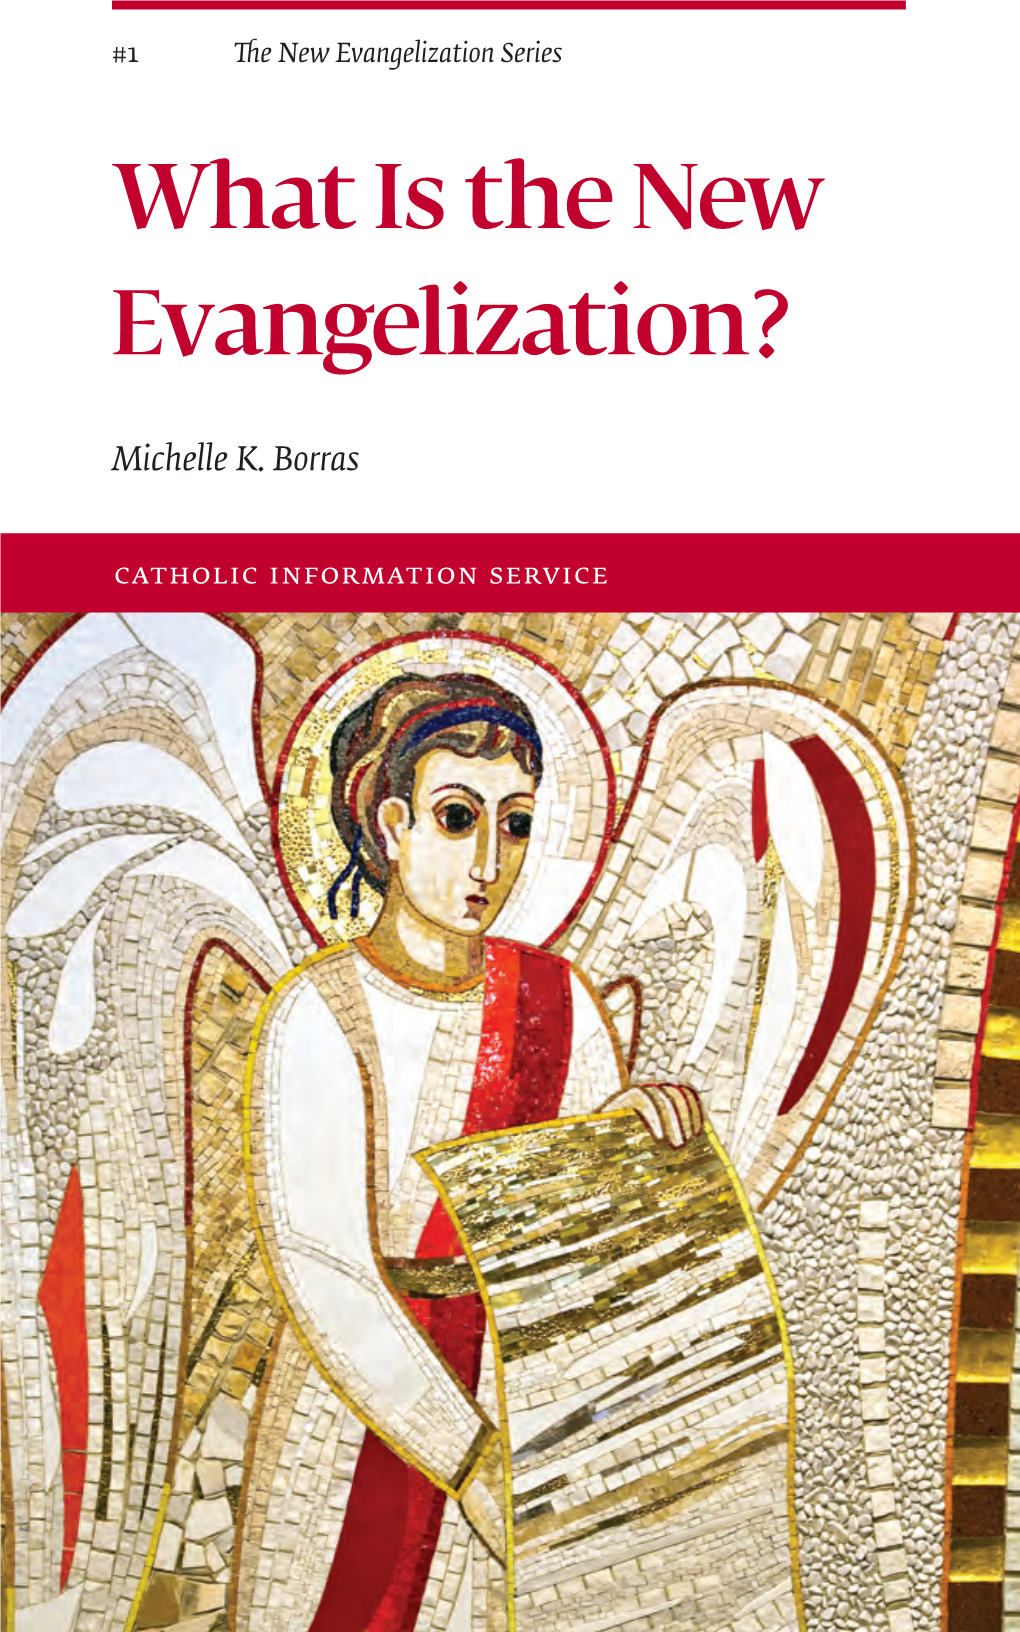 What Is the New Evangelization? Information Service Quoted Works Are Copyright Their Respec- Part I “For God So Loved the World” Tive Authors